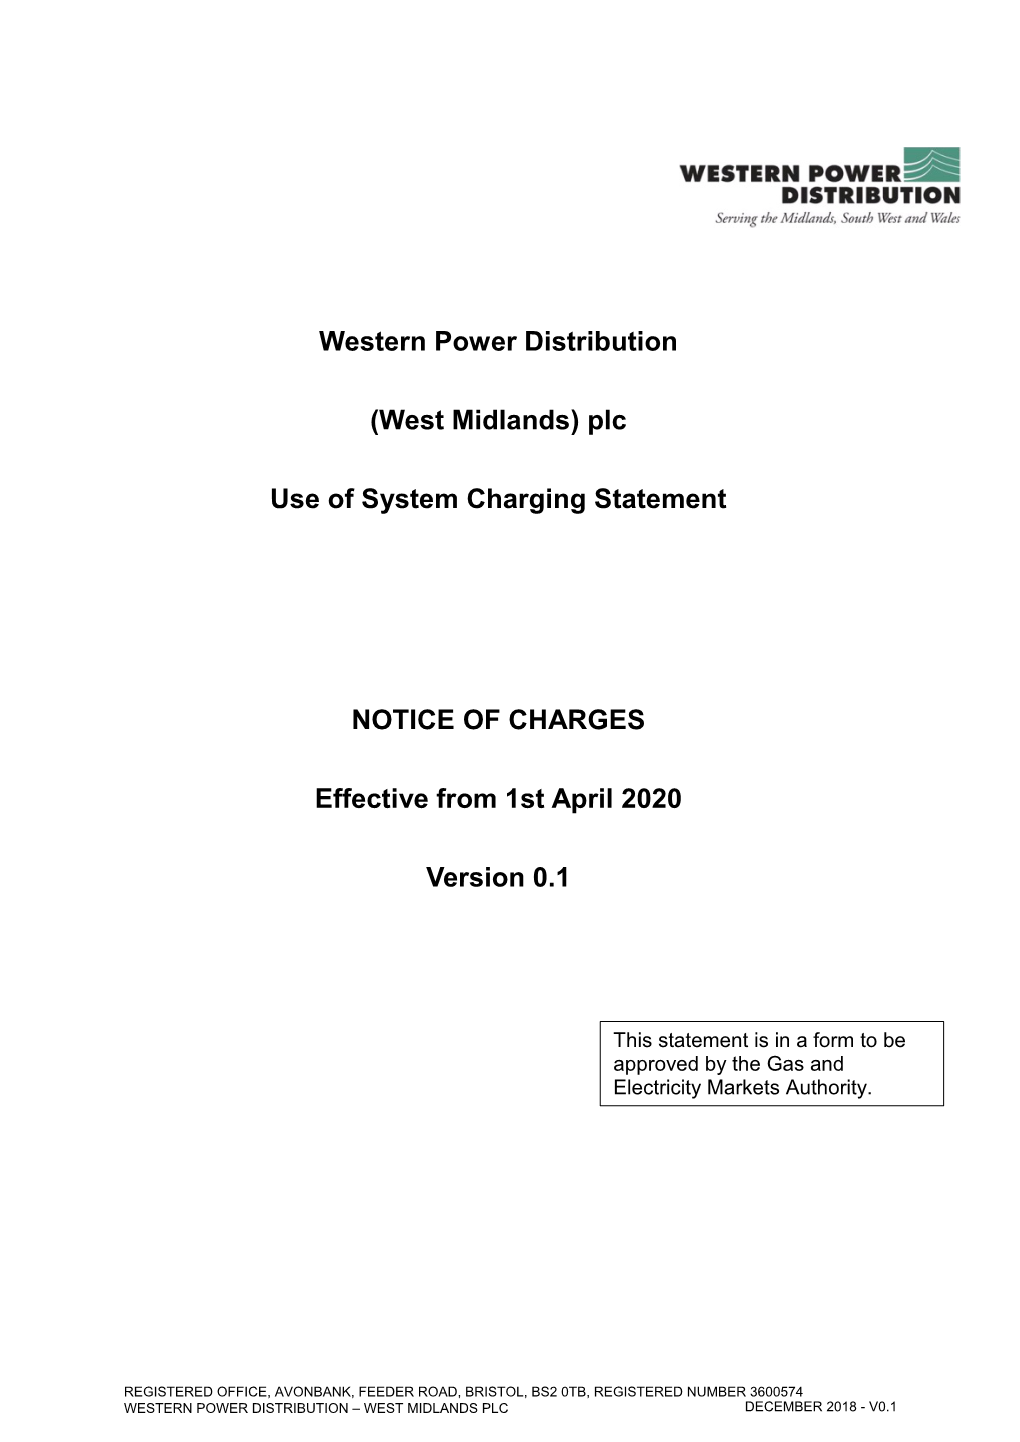 Western Power Distribution (West Midlands) Plc Use of System